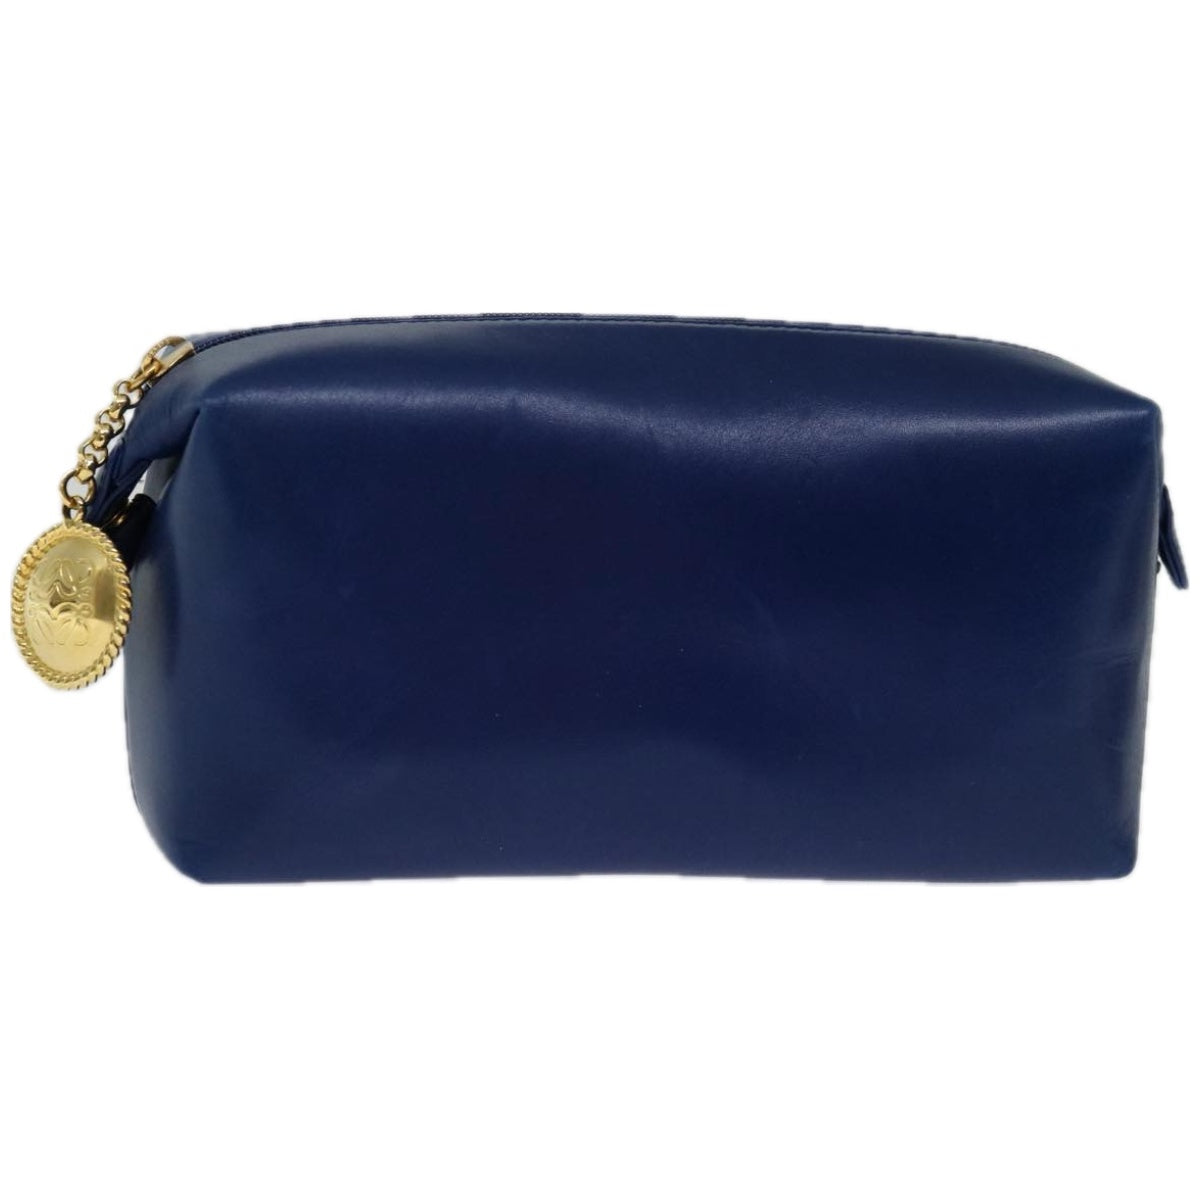 LOEWE Pouch Leather Blue Auth 67125